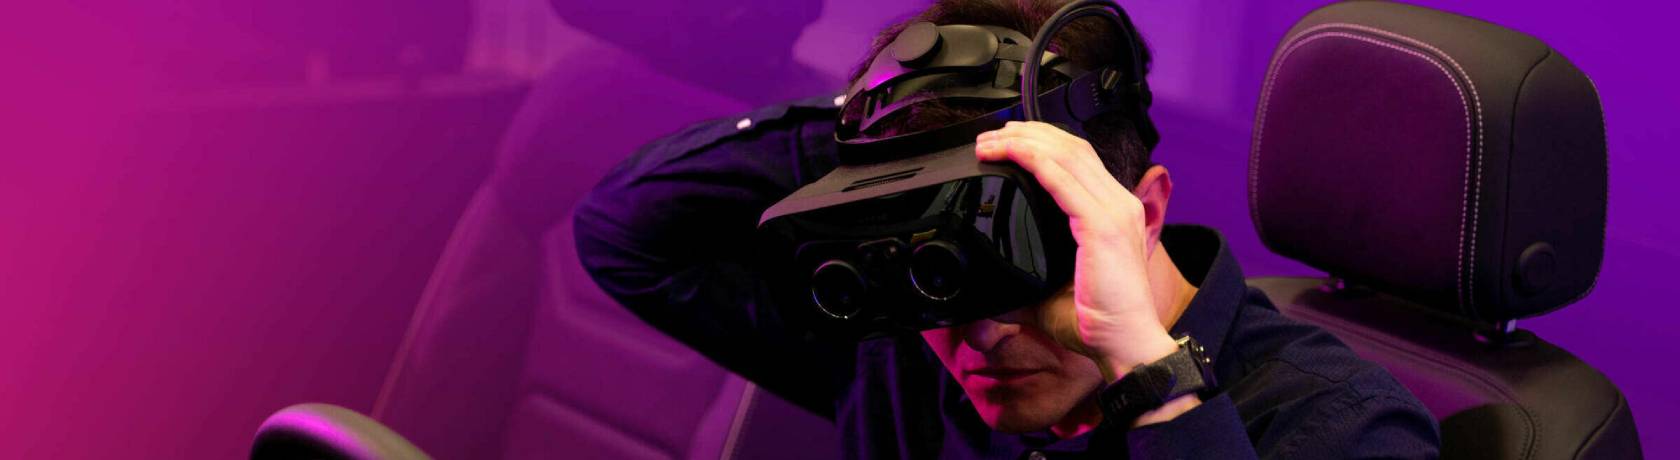 Development, production and logistics: applications of virtual reality 